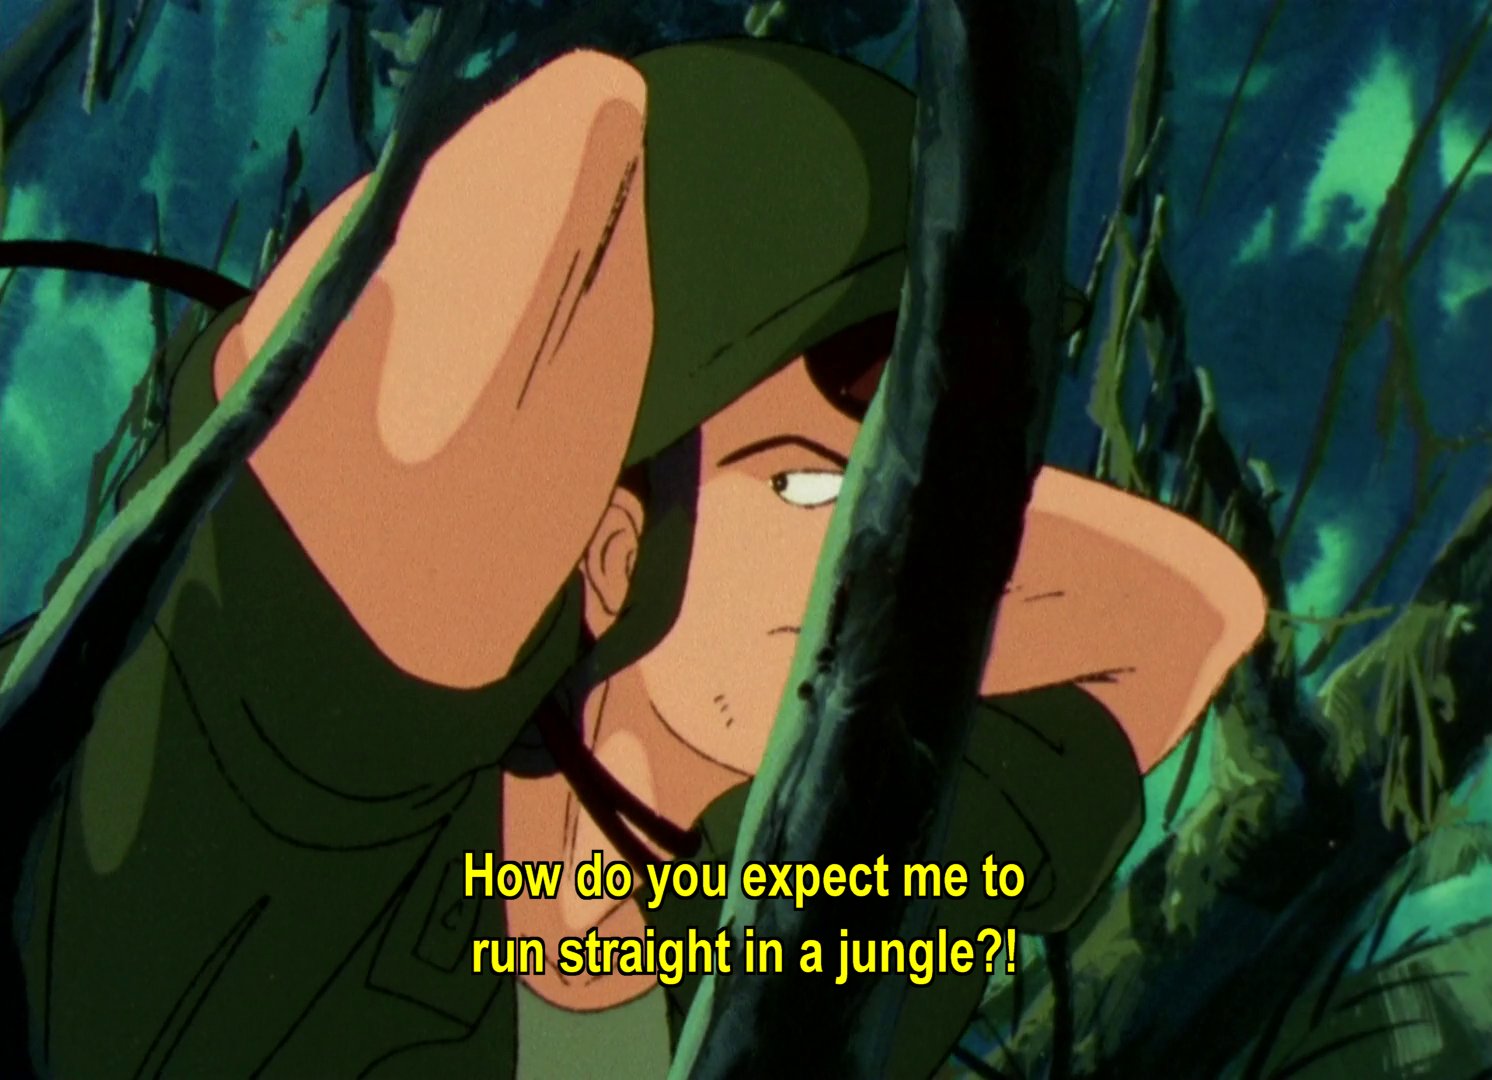 Soldier, with his hands behind his head: How do you expect me to run straight in a jungle?!